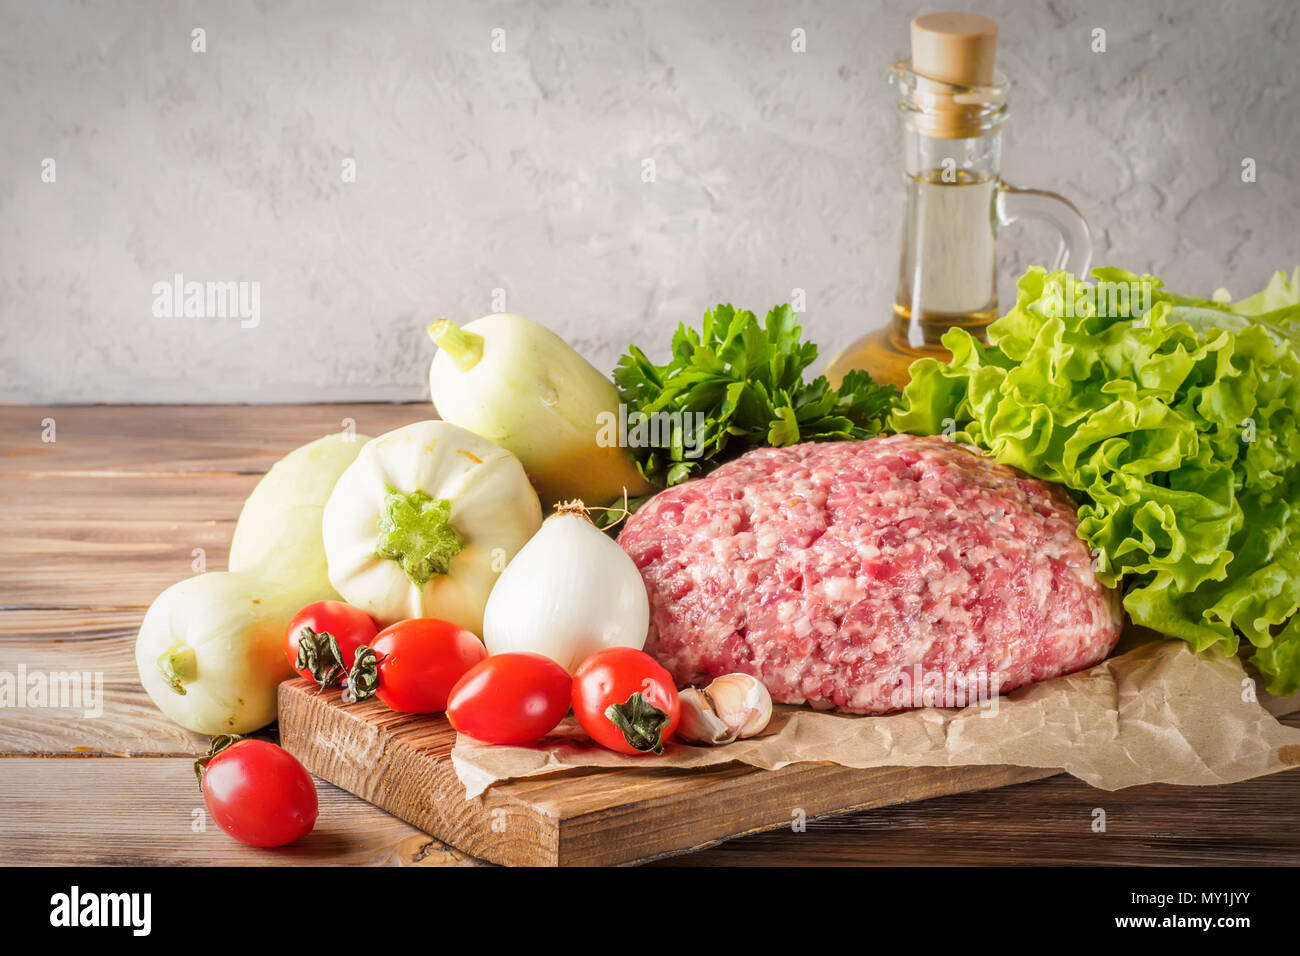 Mixe of ground meat minced beef and pork Stock Photo